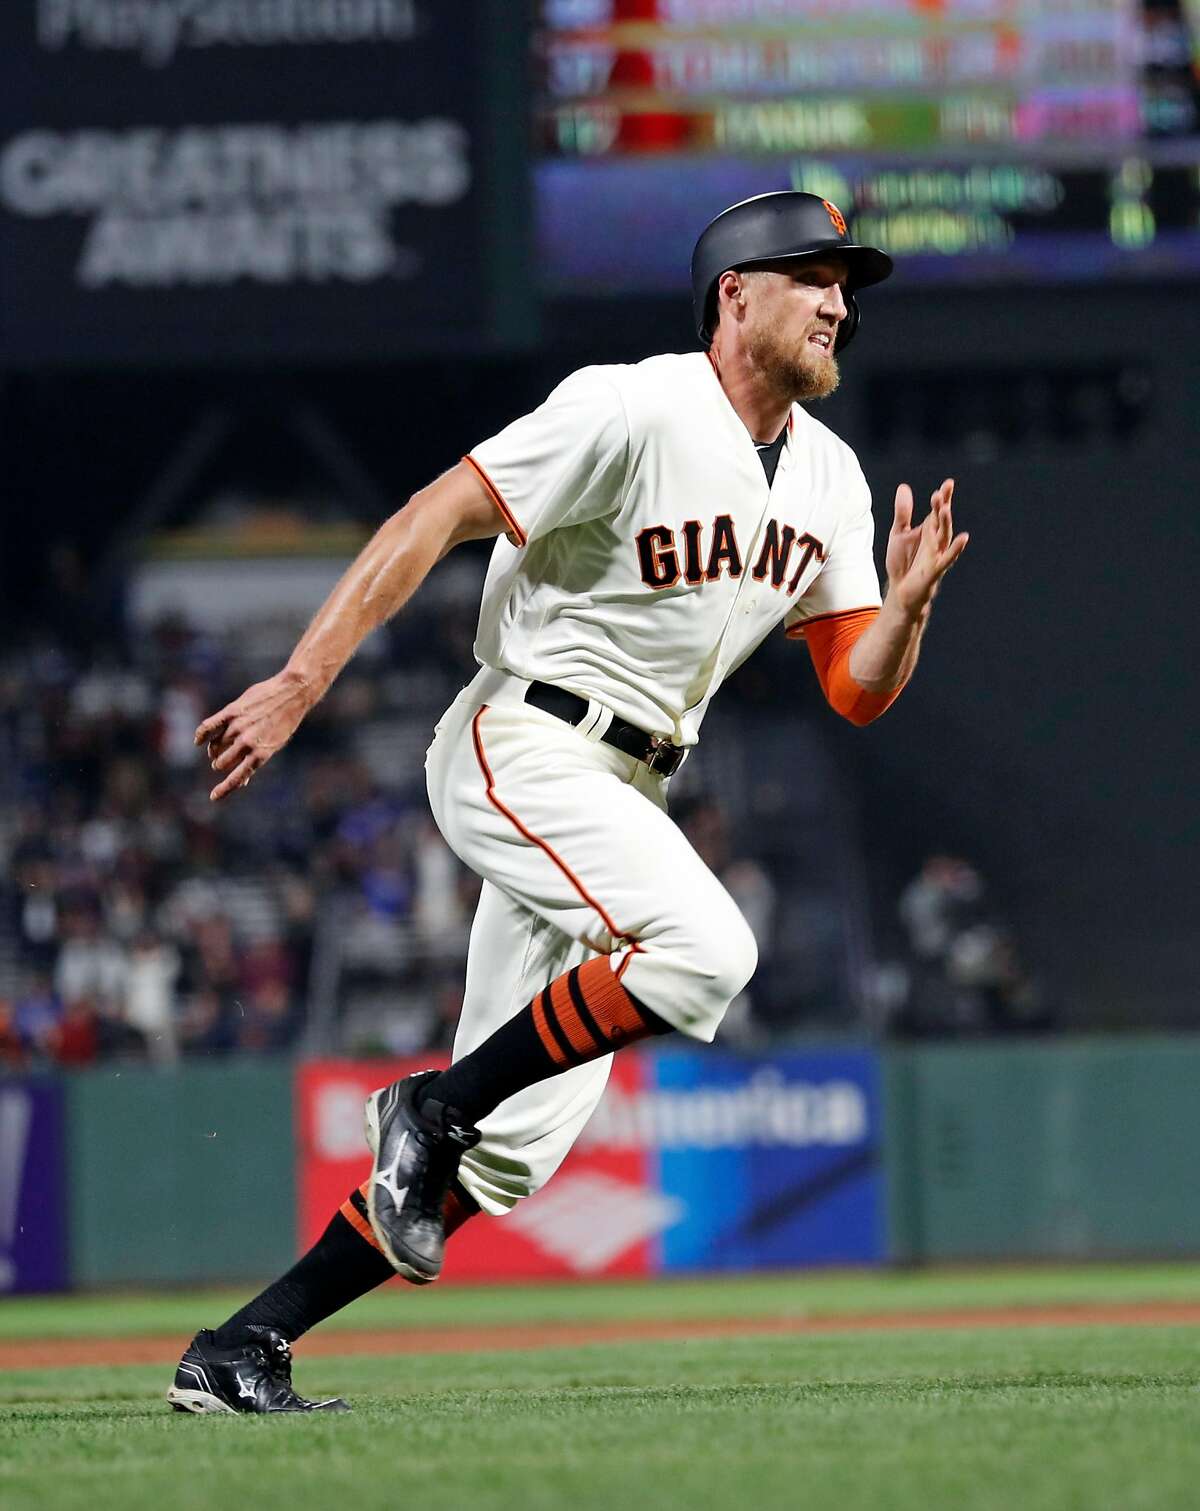 Dodger Blue on X: Hunter Pence has a Giants shirt under his